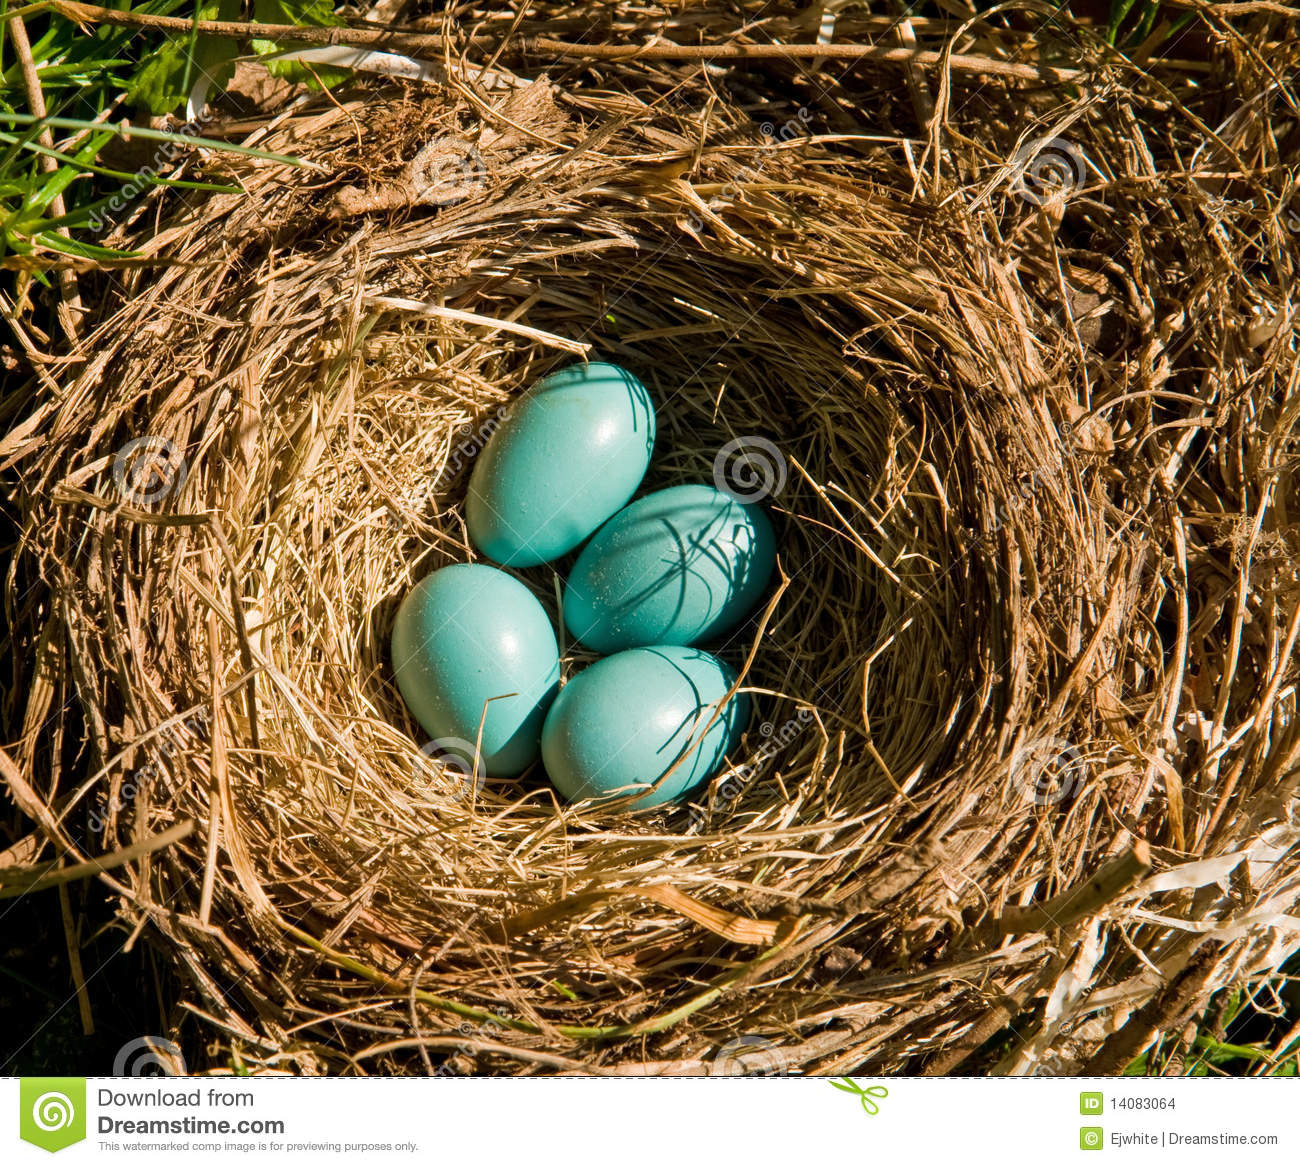 Robin S Eggs In A Nest In The Wild    Possibly Abandoned By The    